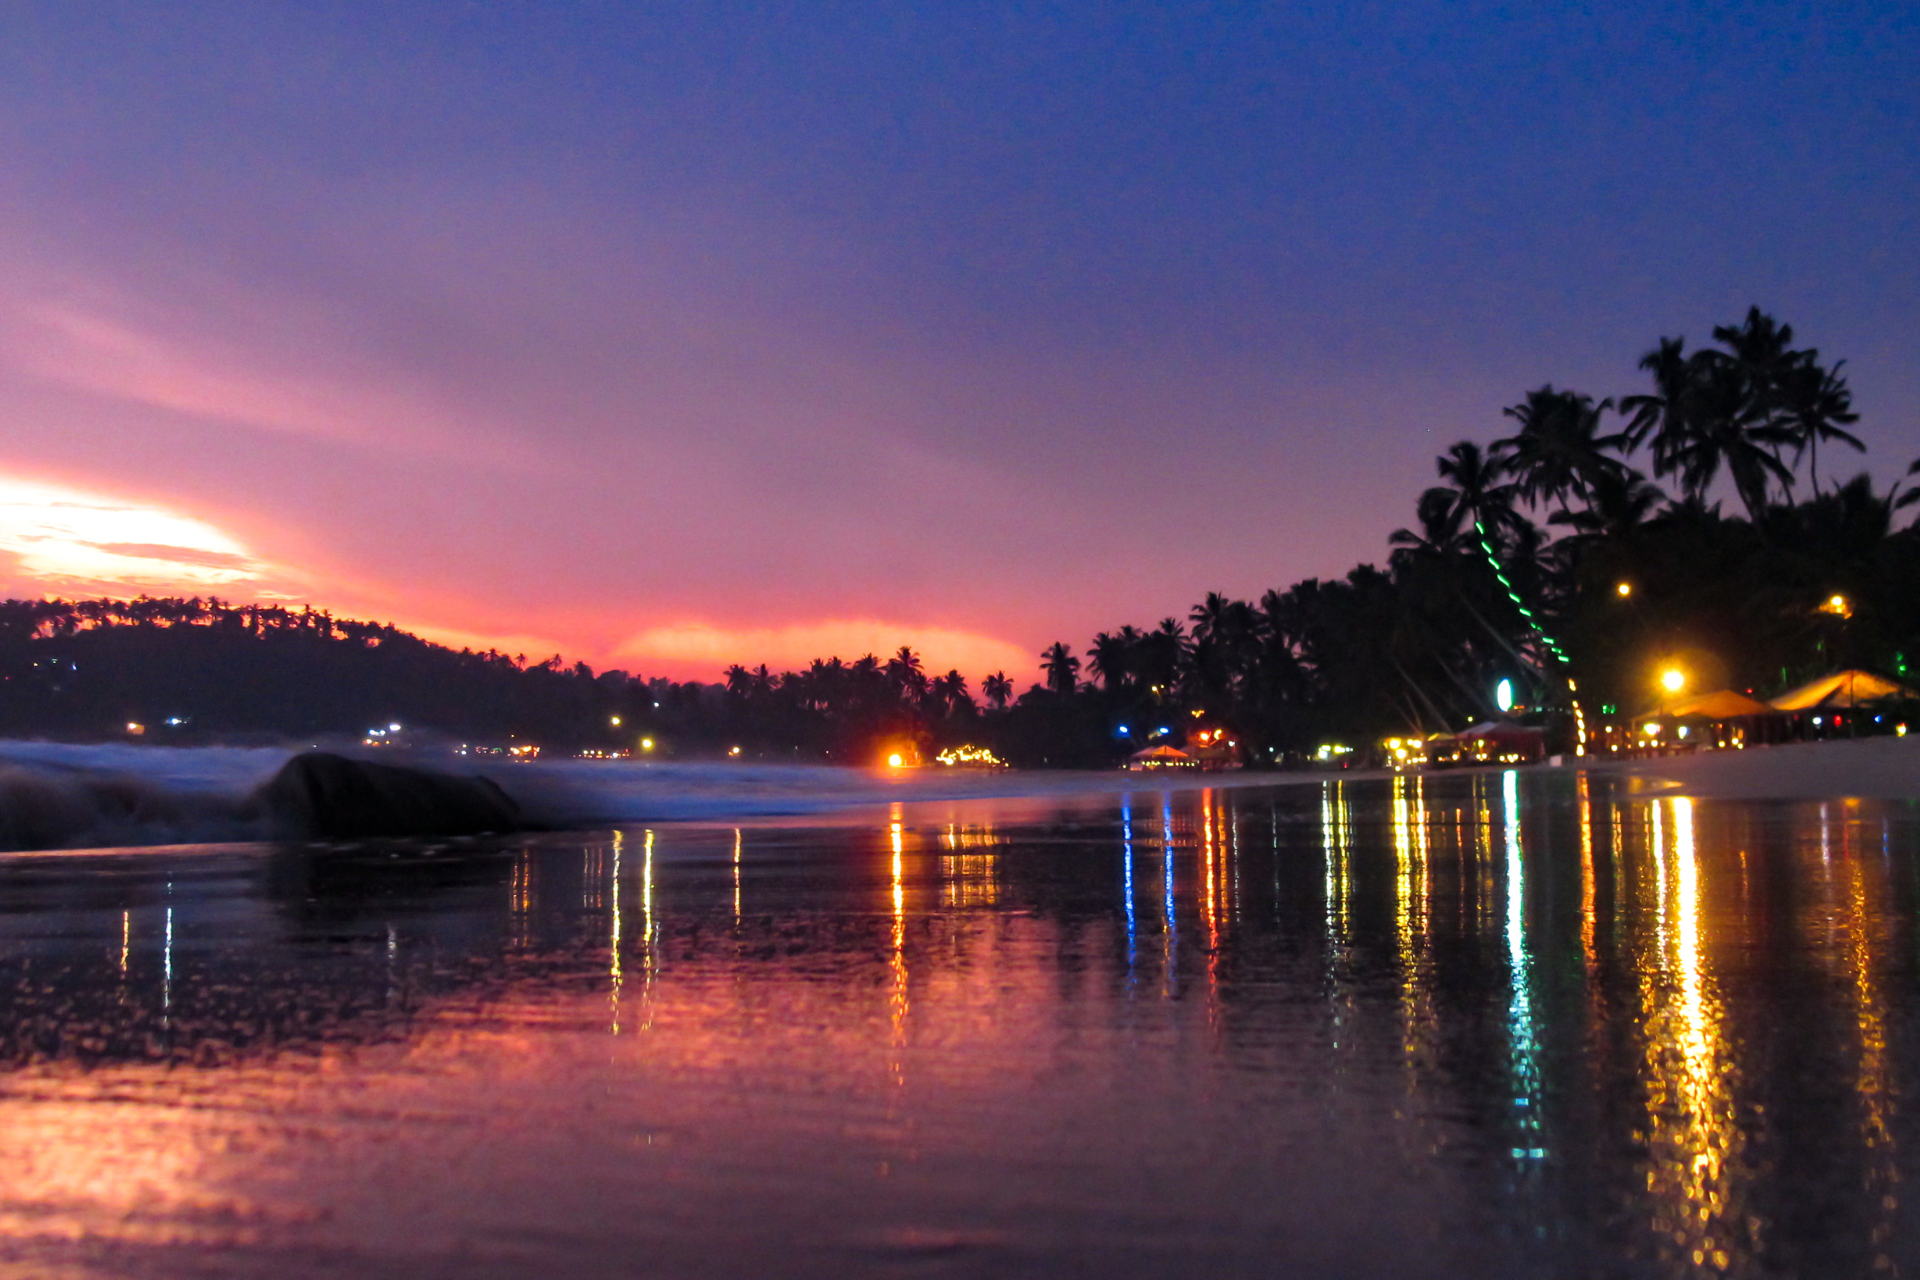 Mirissa Beach at night, seen with colorful lights, palm trees and calm sea.